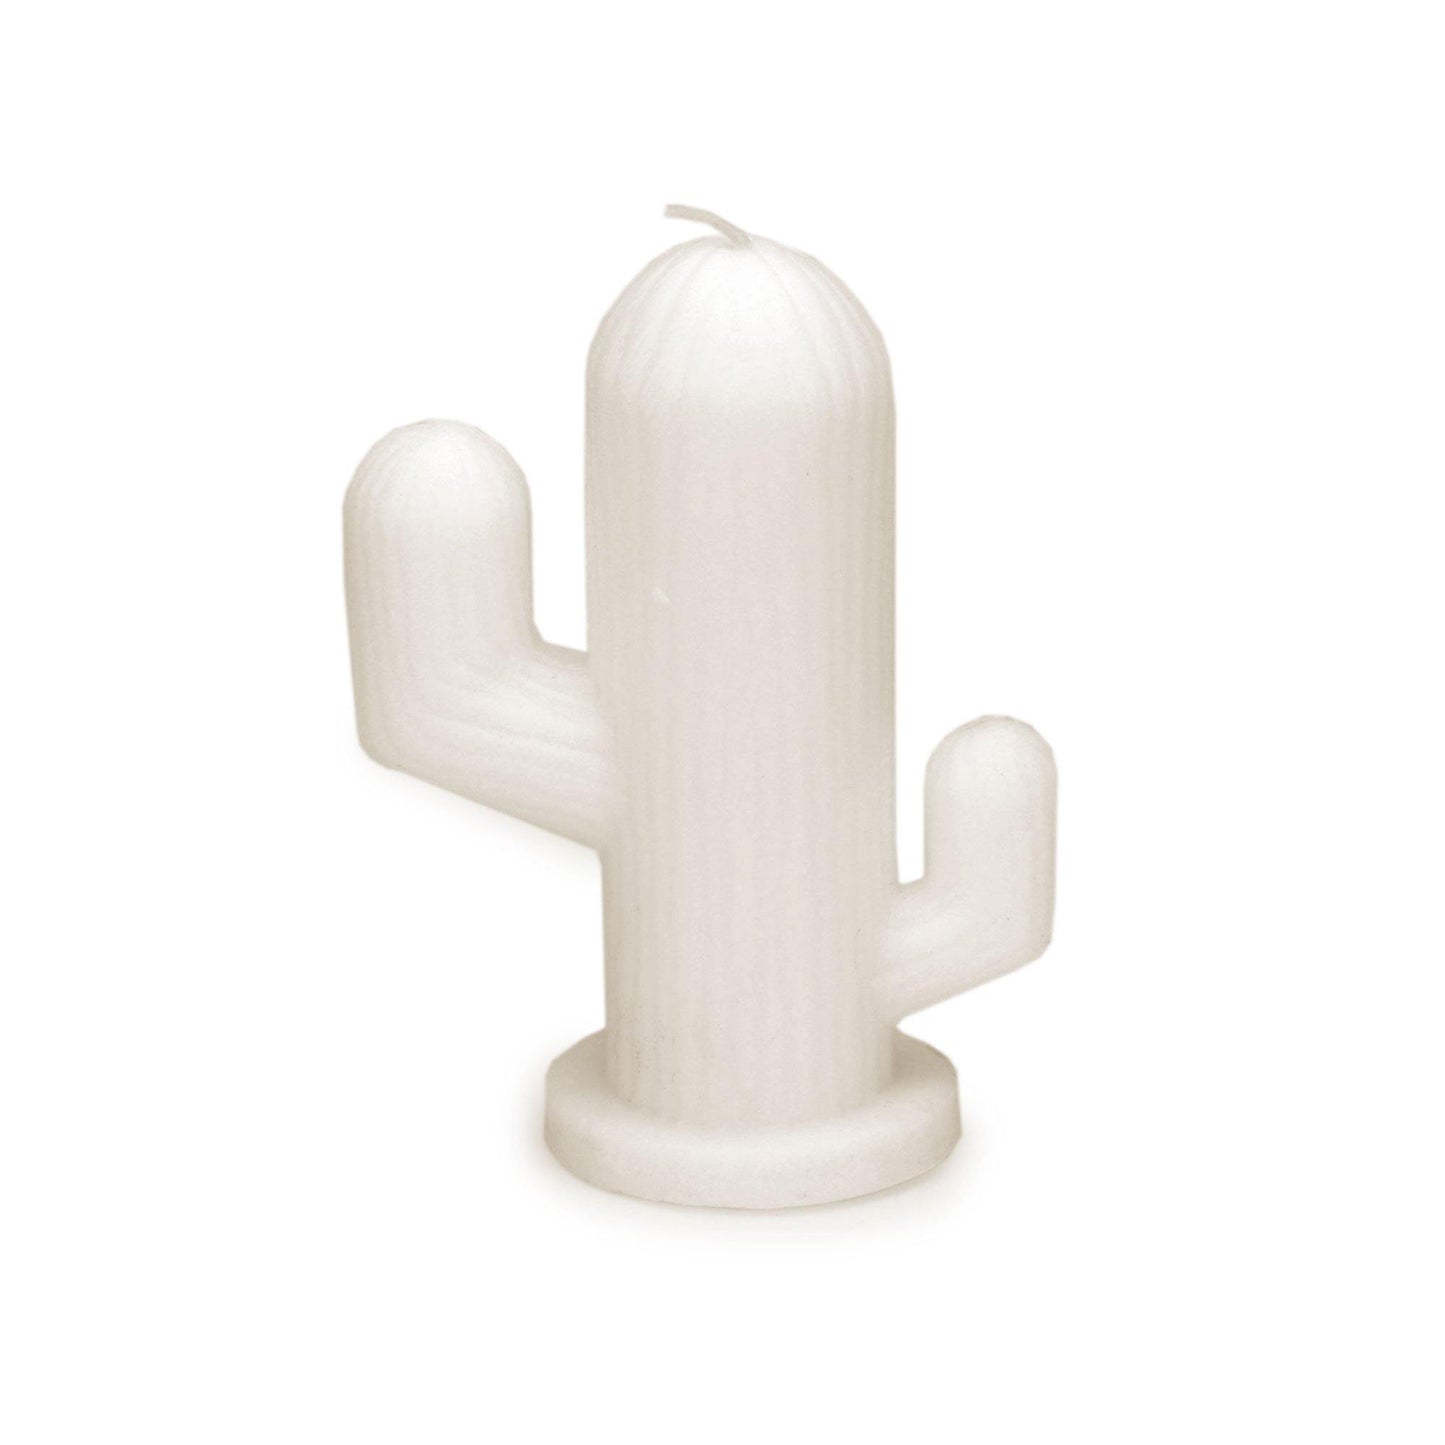 SOUTH HOUS emoji candle could be a candle could be a new friend